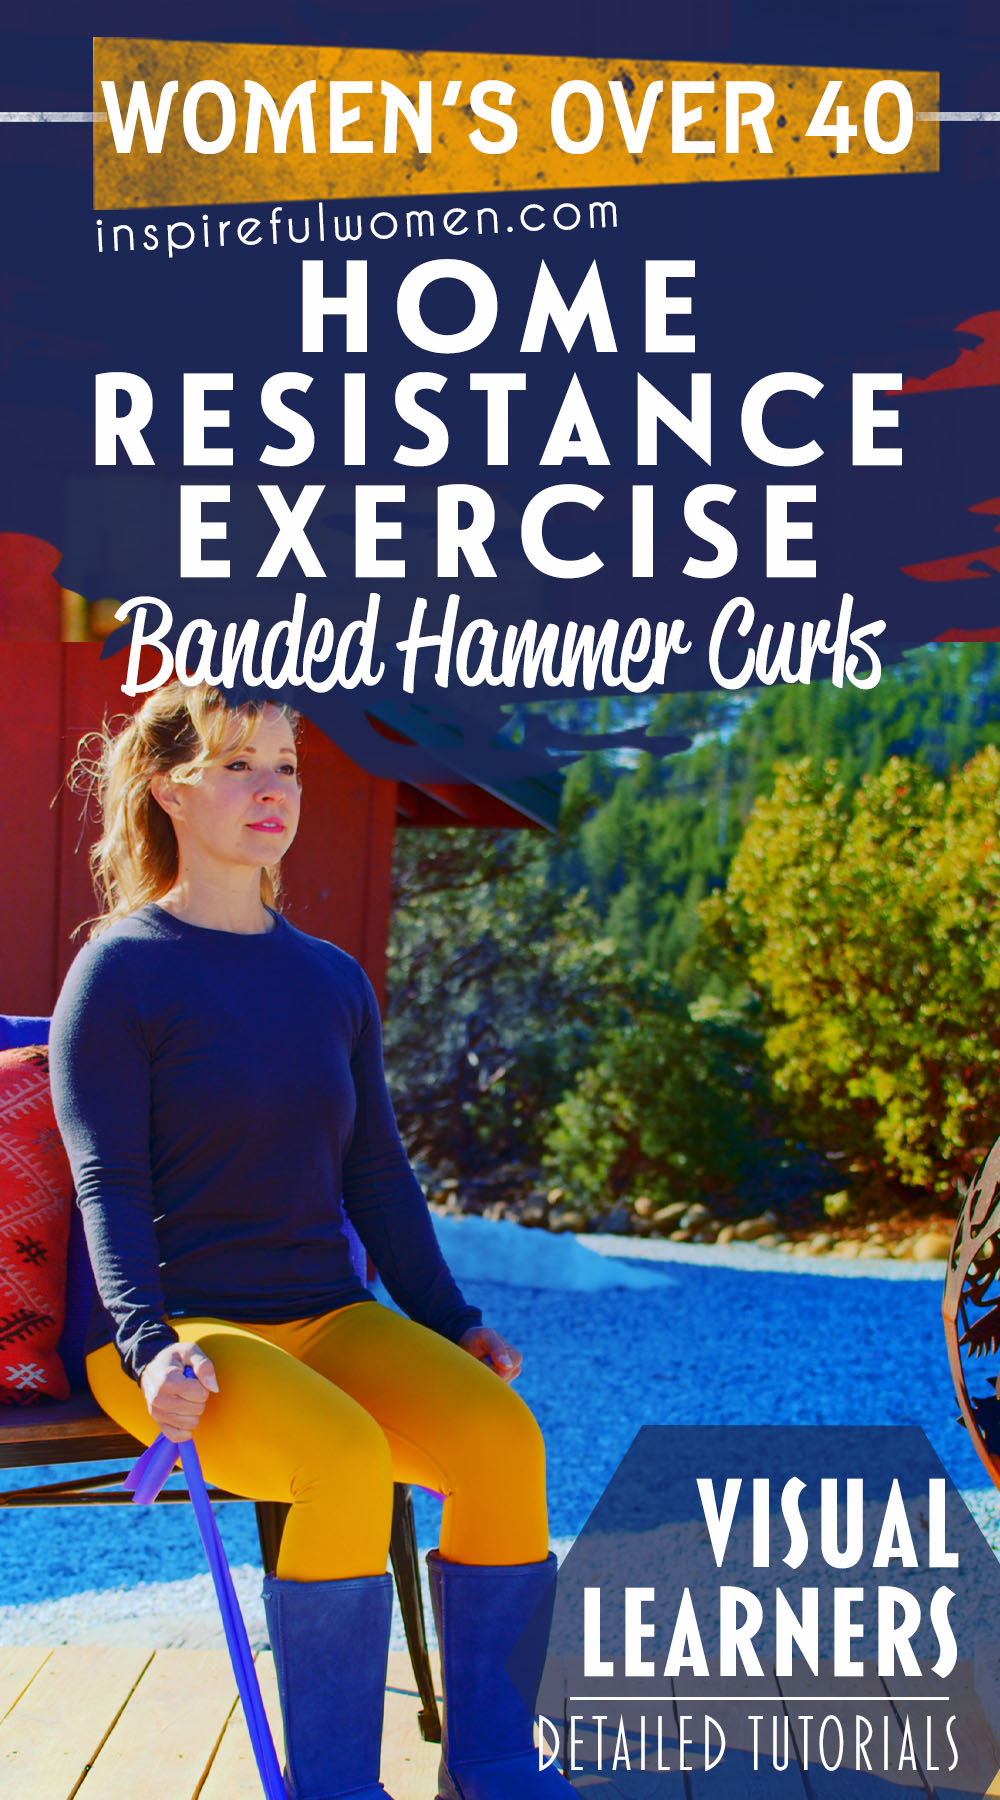 banded-hammer-curl-biceps-exercise-at-home-women-40+